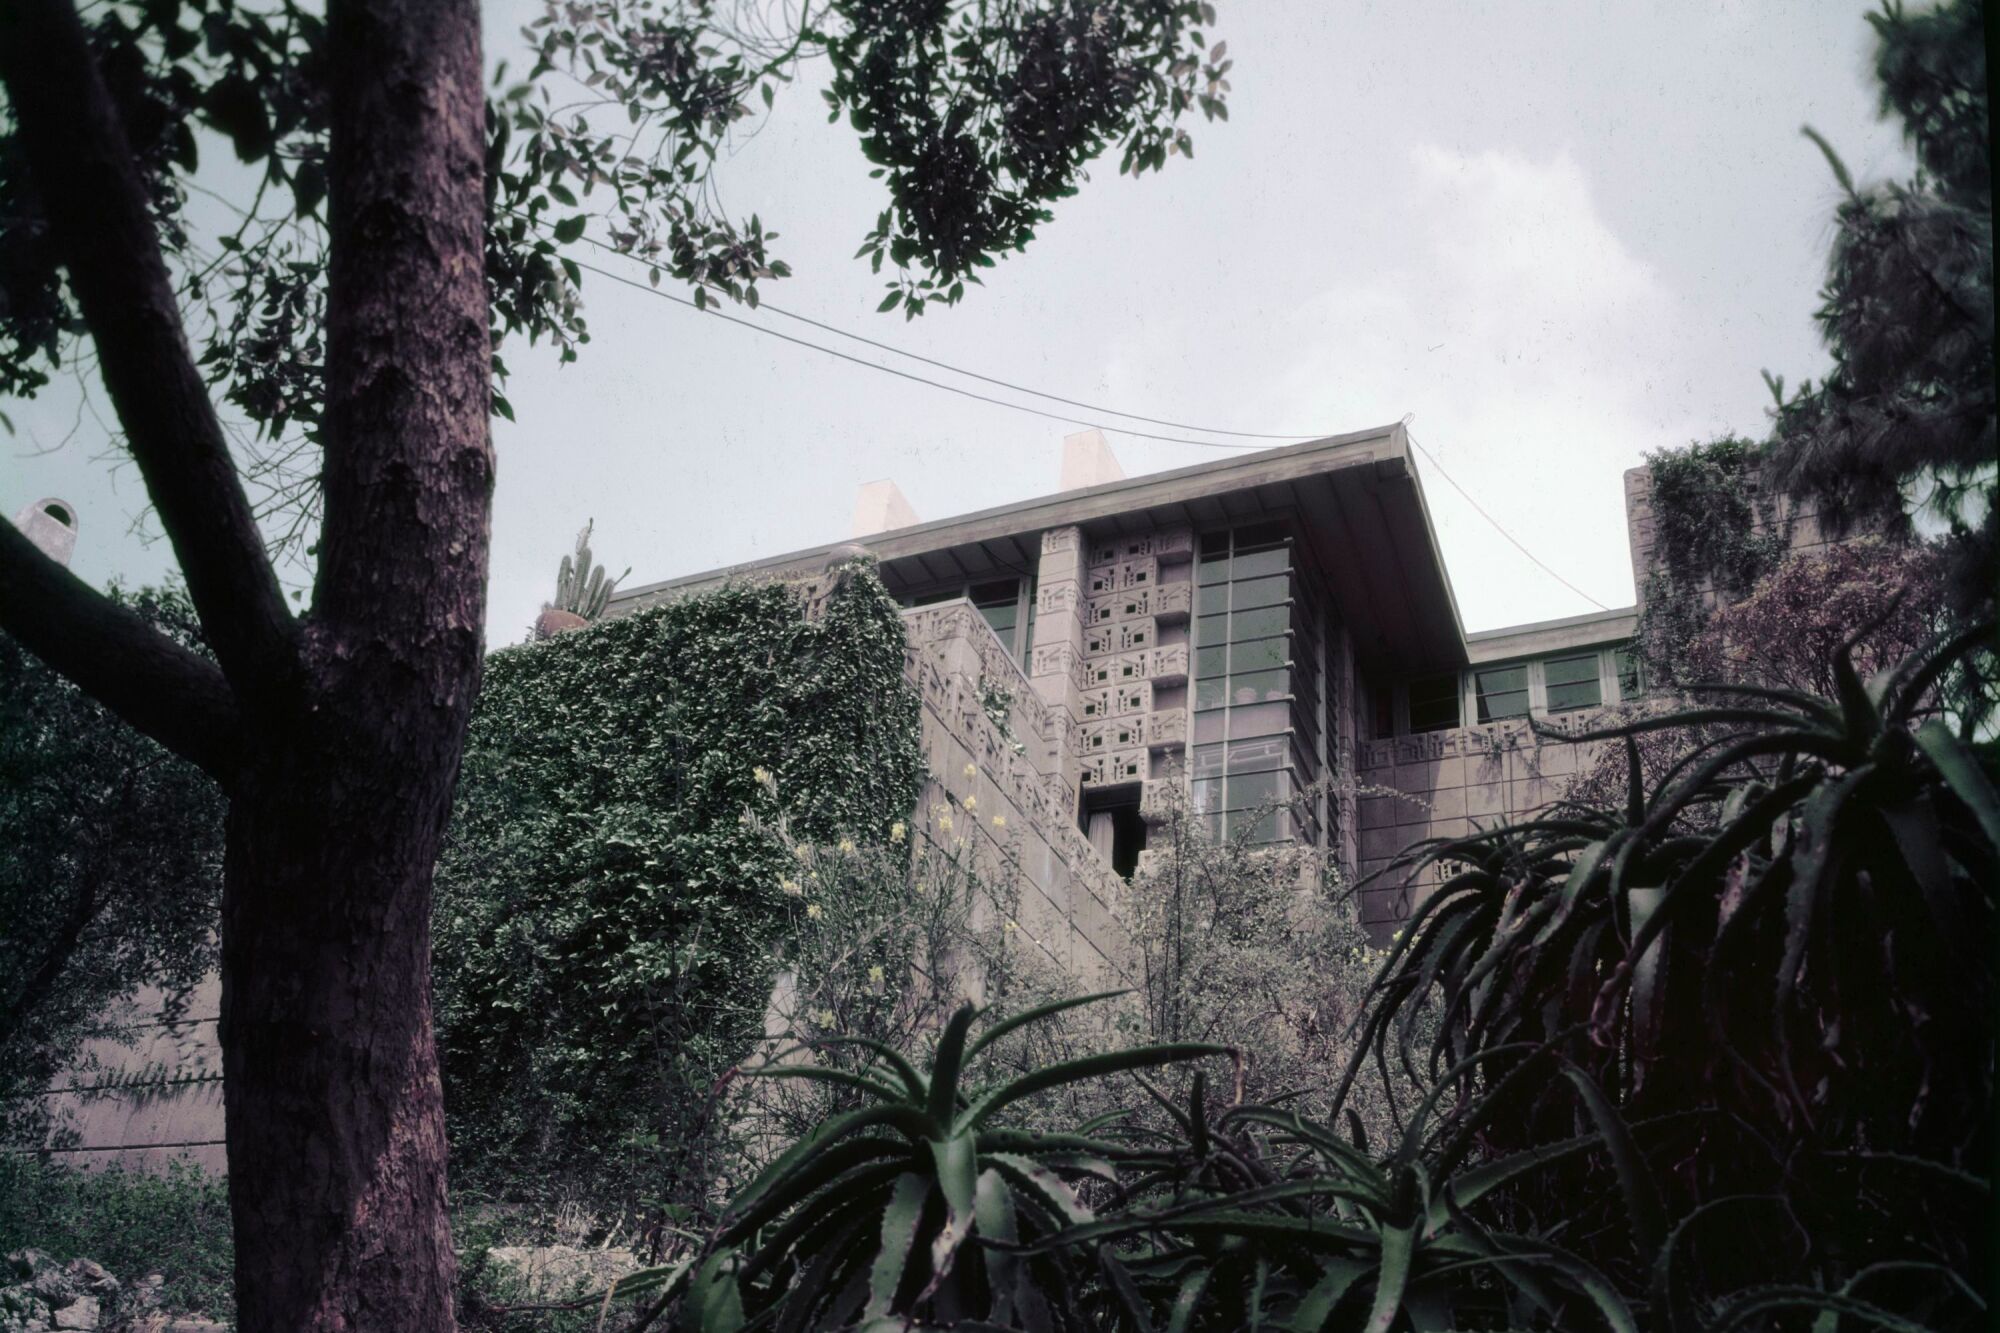 A vintage color image from the 1950s shows an upward view of the textile-block exterior of the Freeman House.